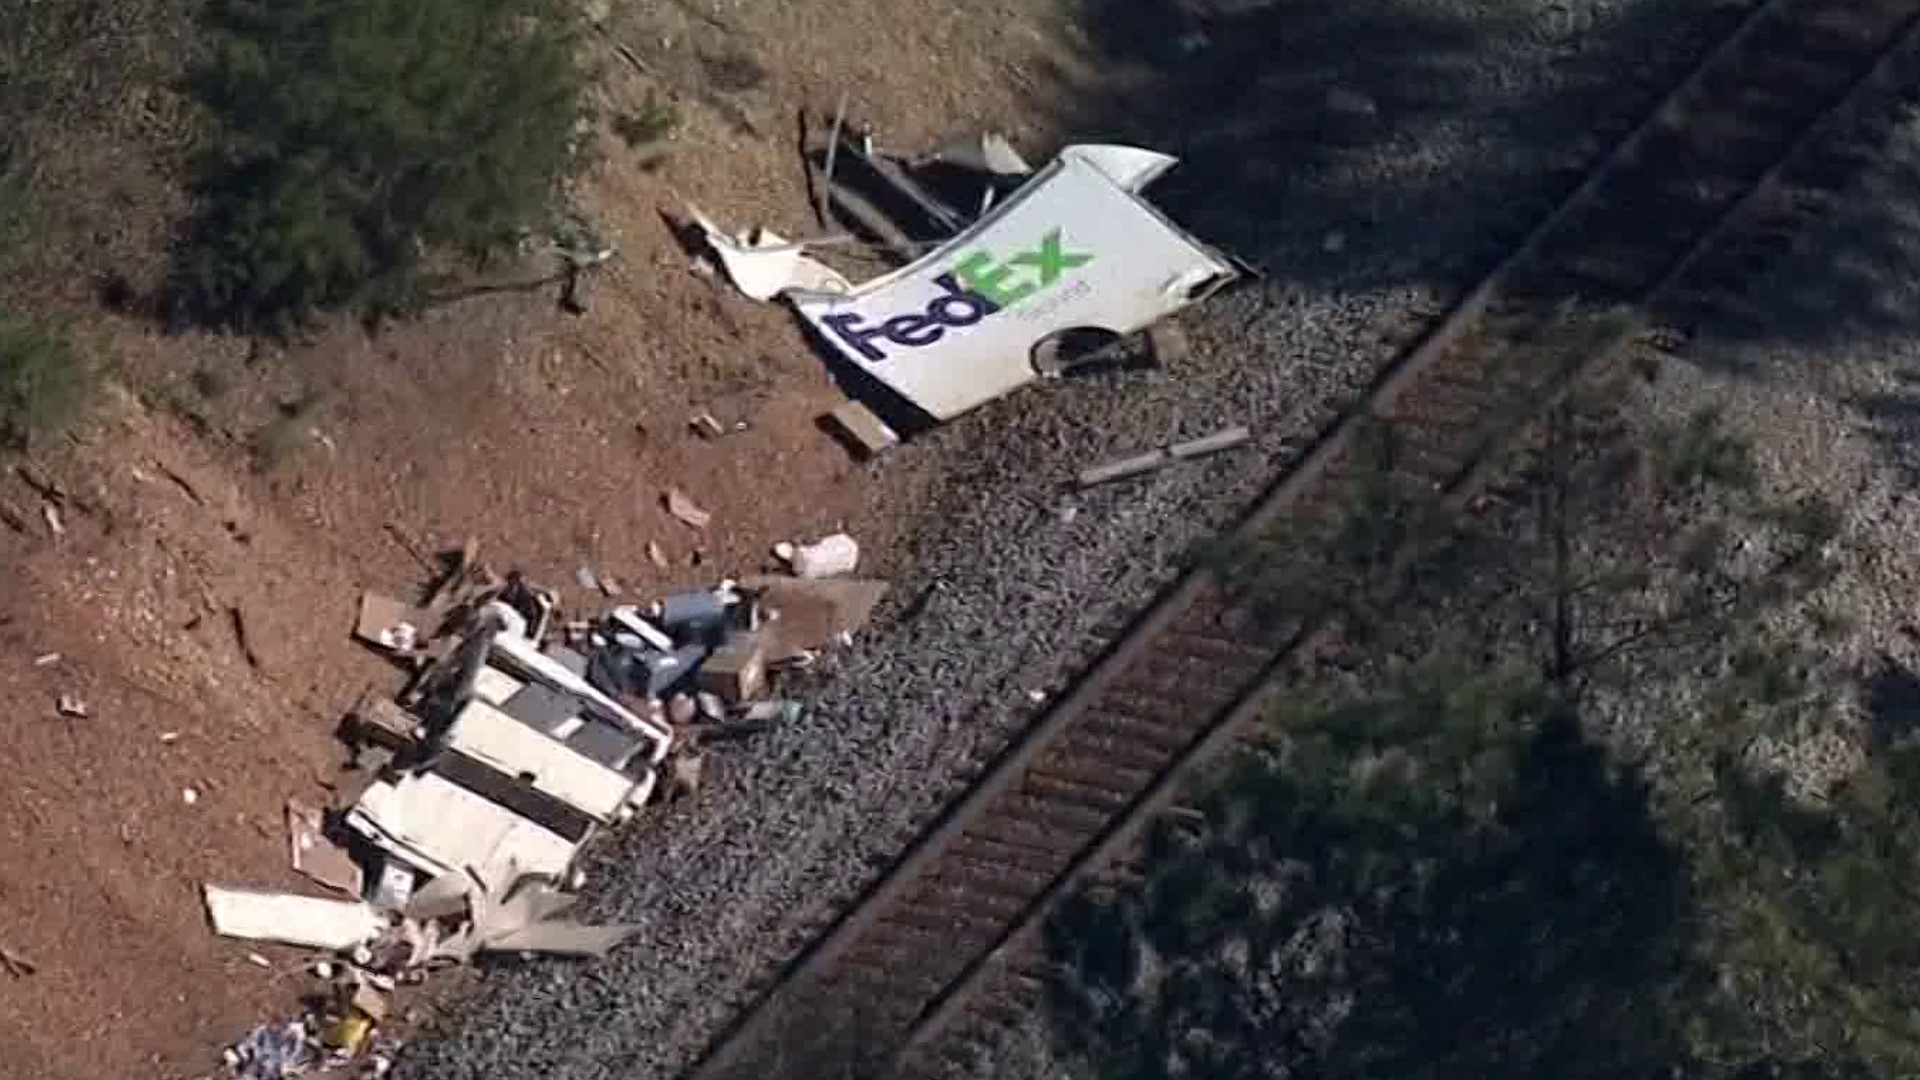 The rail line said 55 people plus crew members were on board and no one was injured.